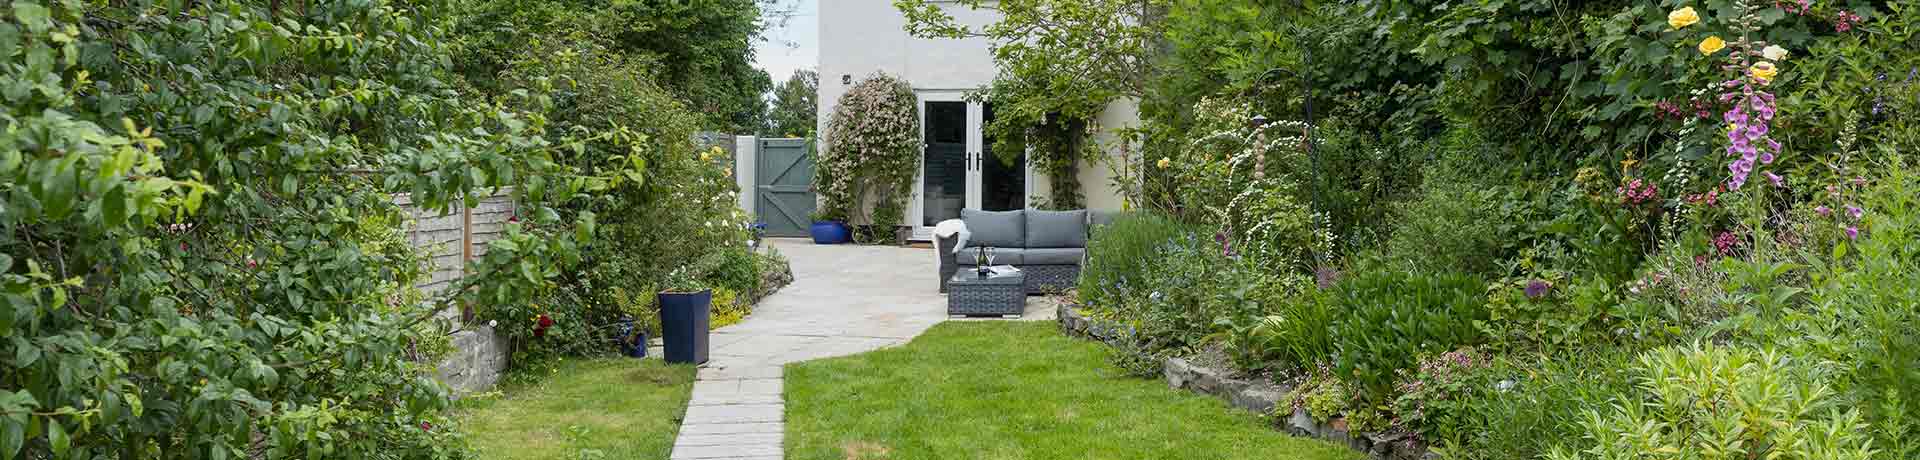 Dog friendly cottages in Cumbria with an enclosed garden.